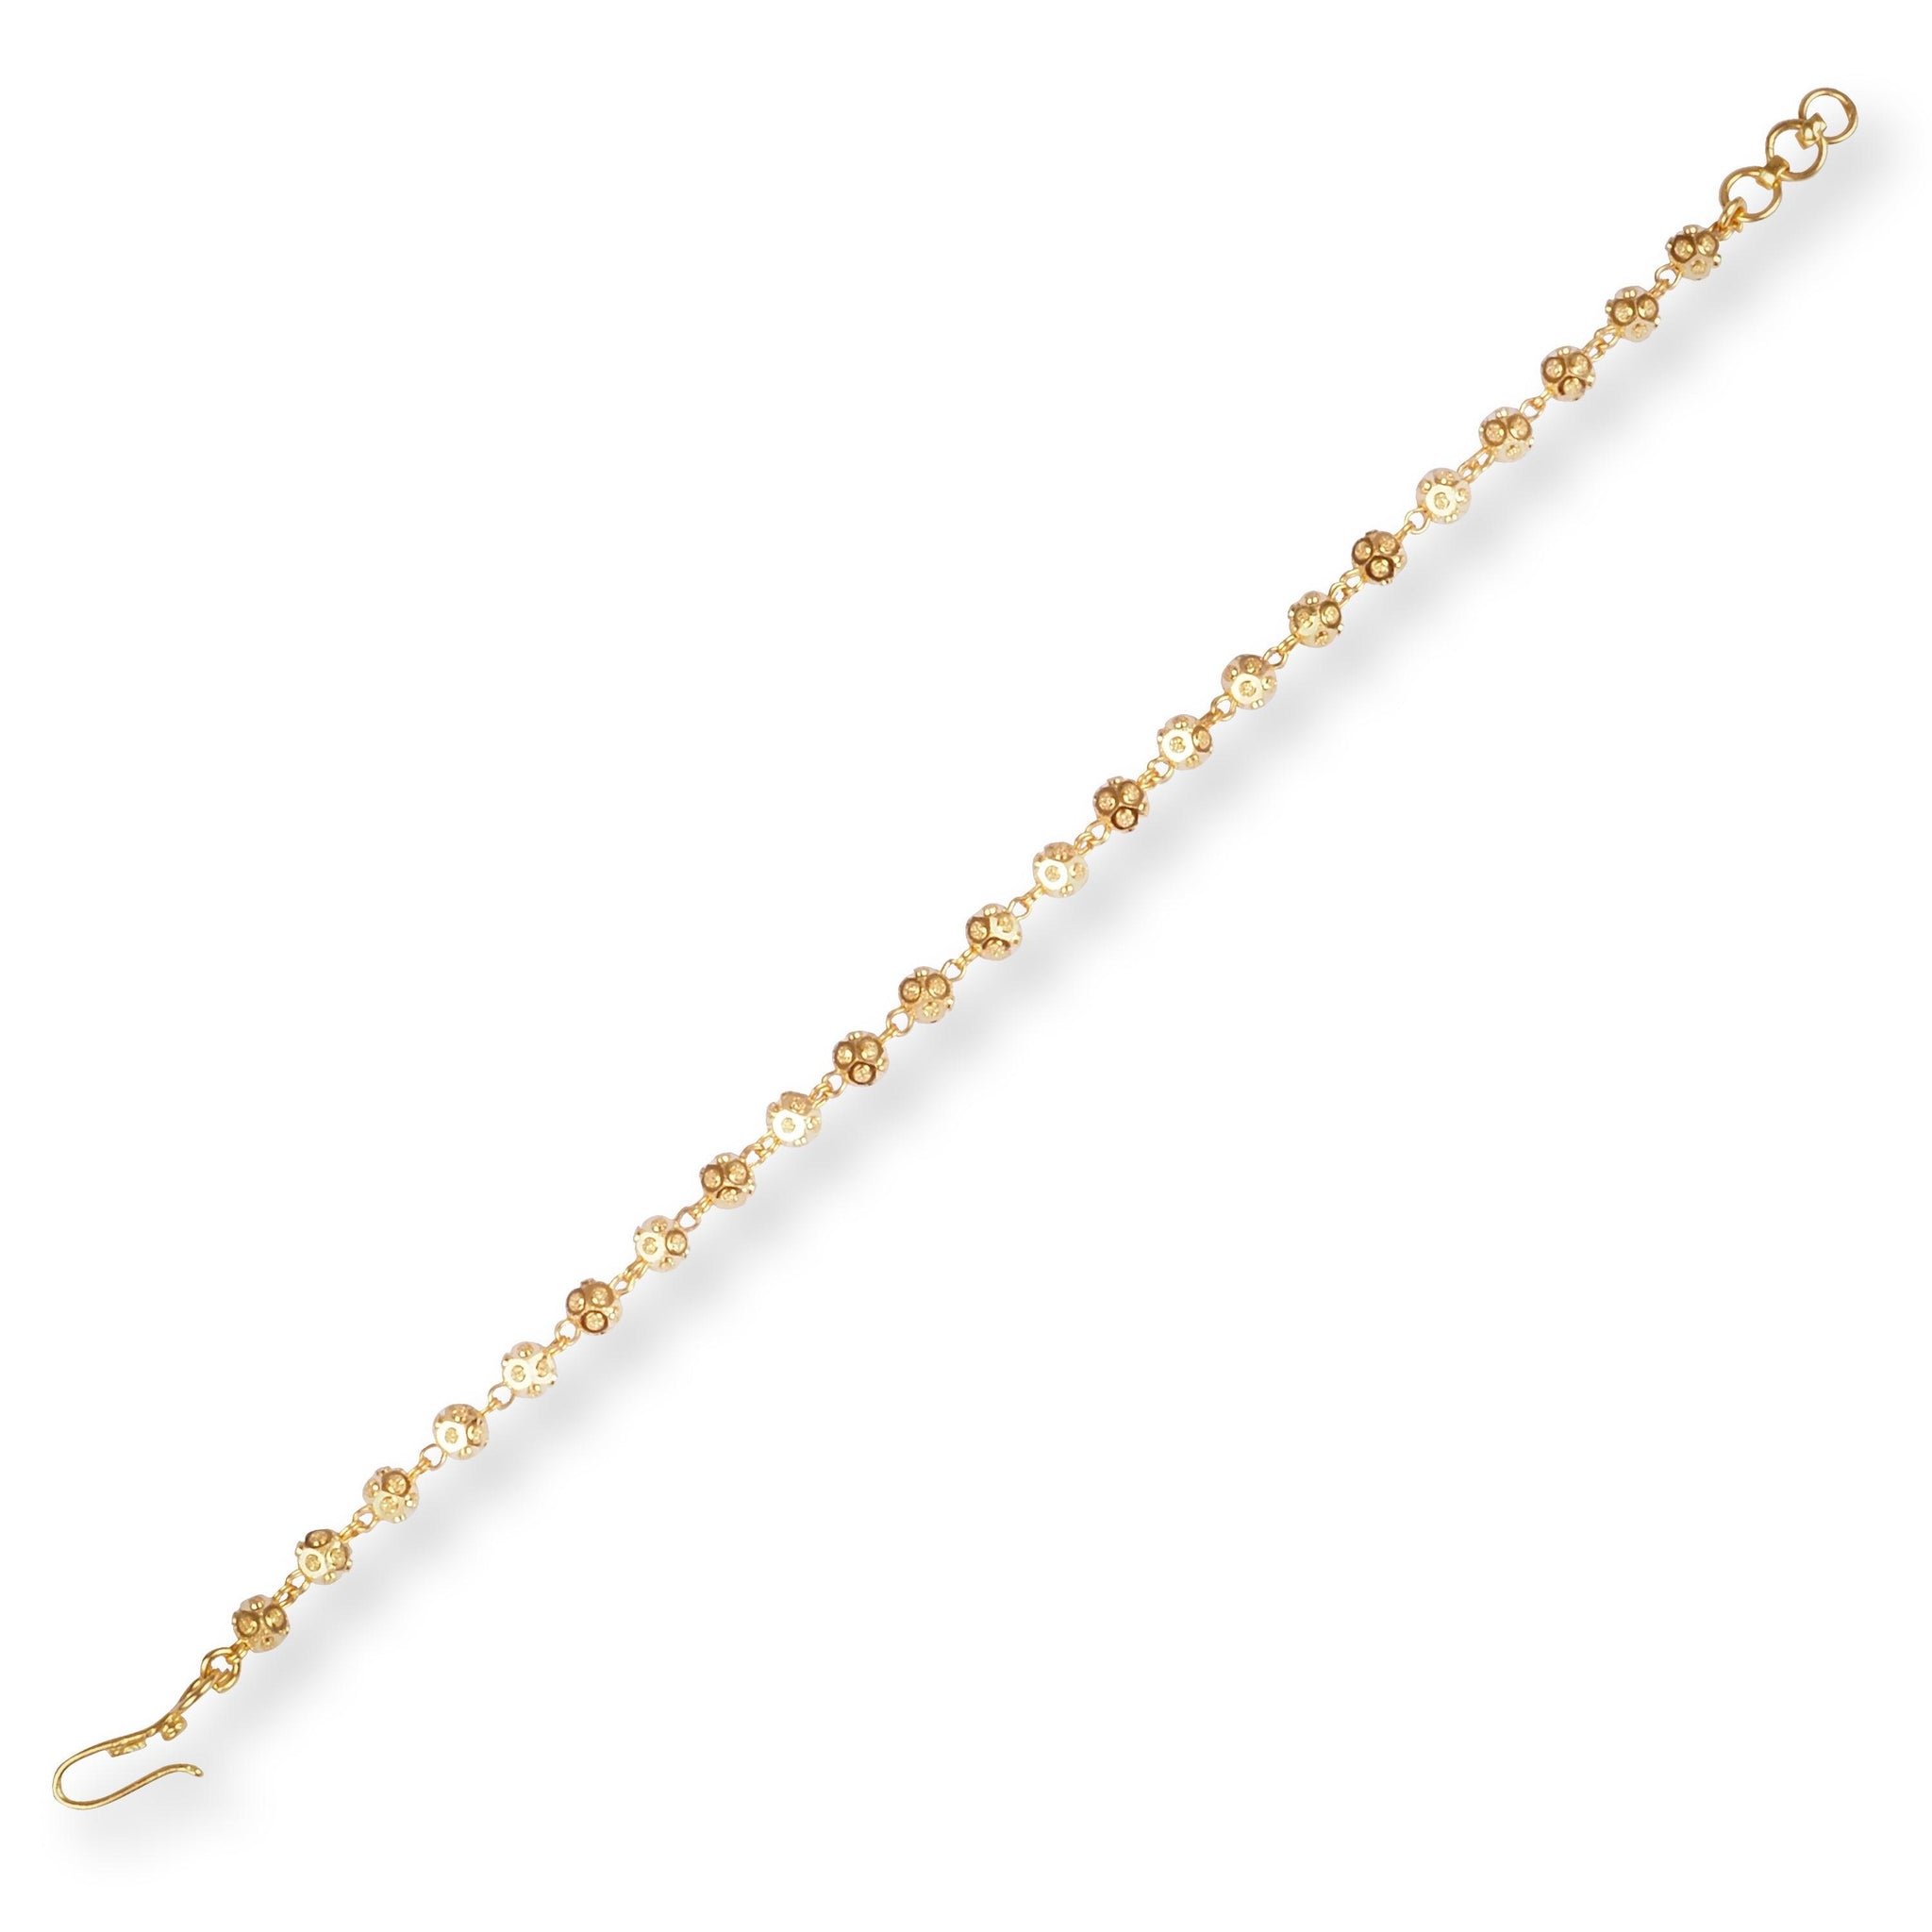 22ct Gold Bracelet with Diamond Cut Beads and Hook Clasp LBR-8499